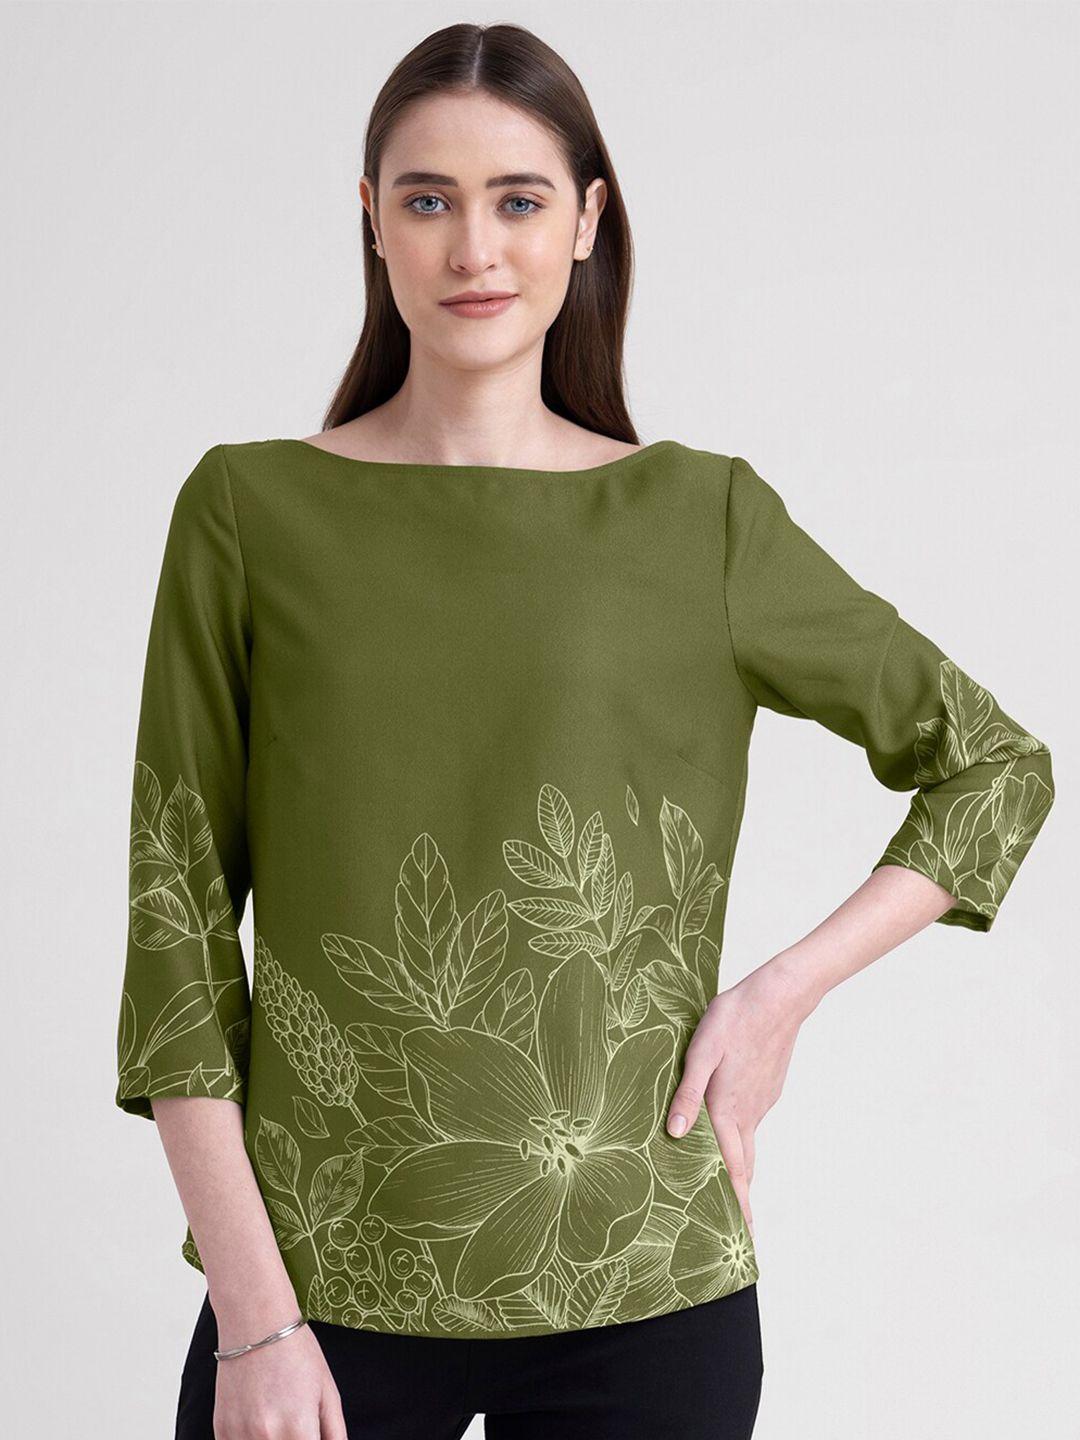 fablestreet olive green floral print top